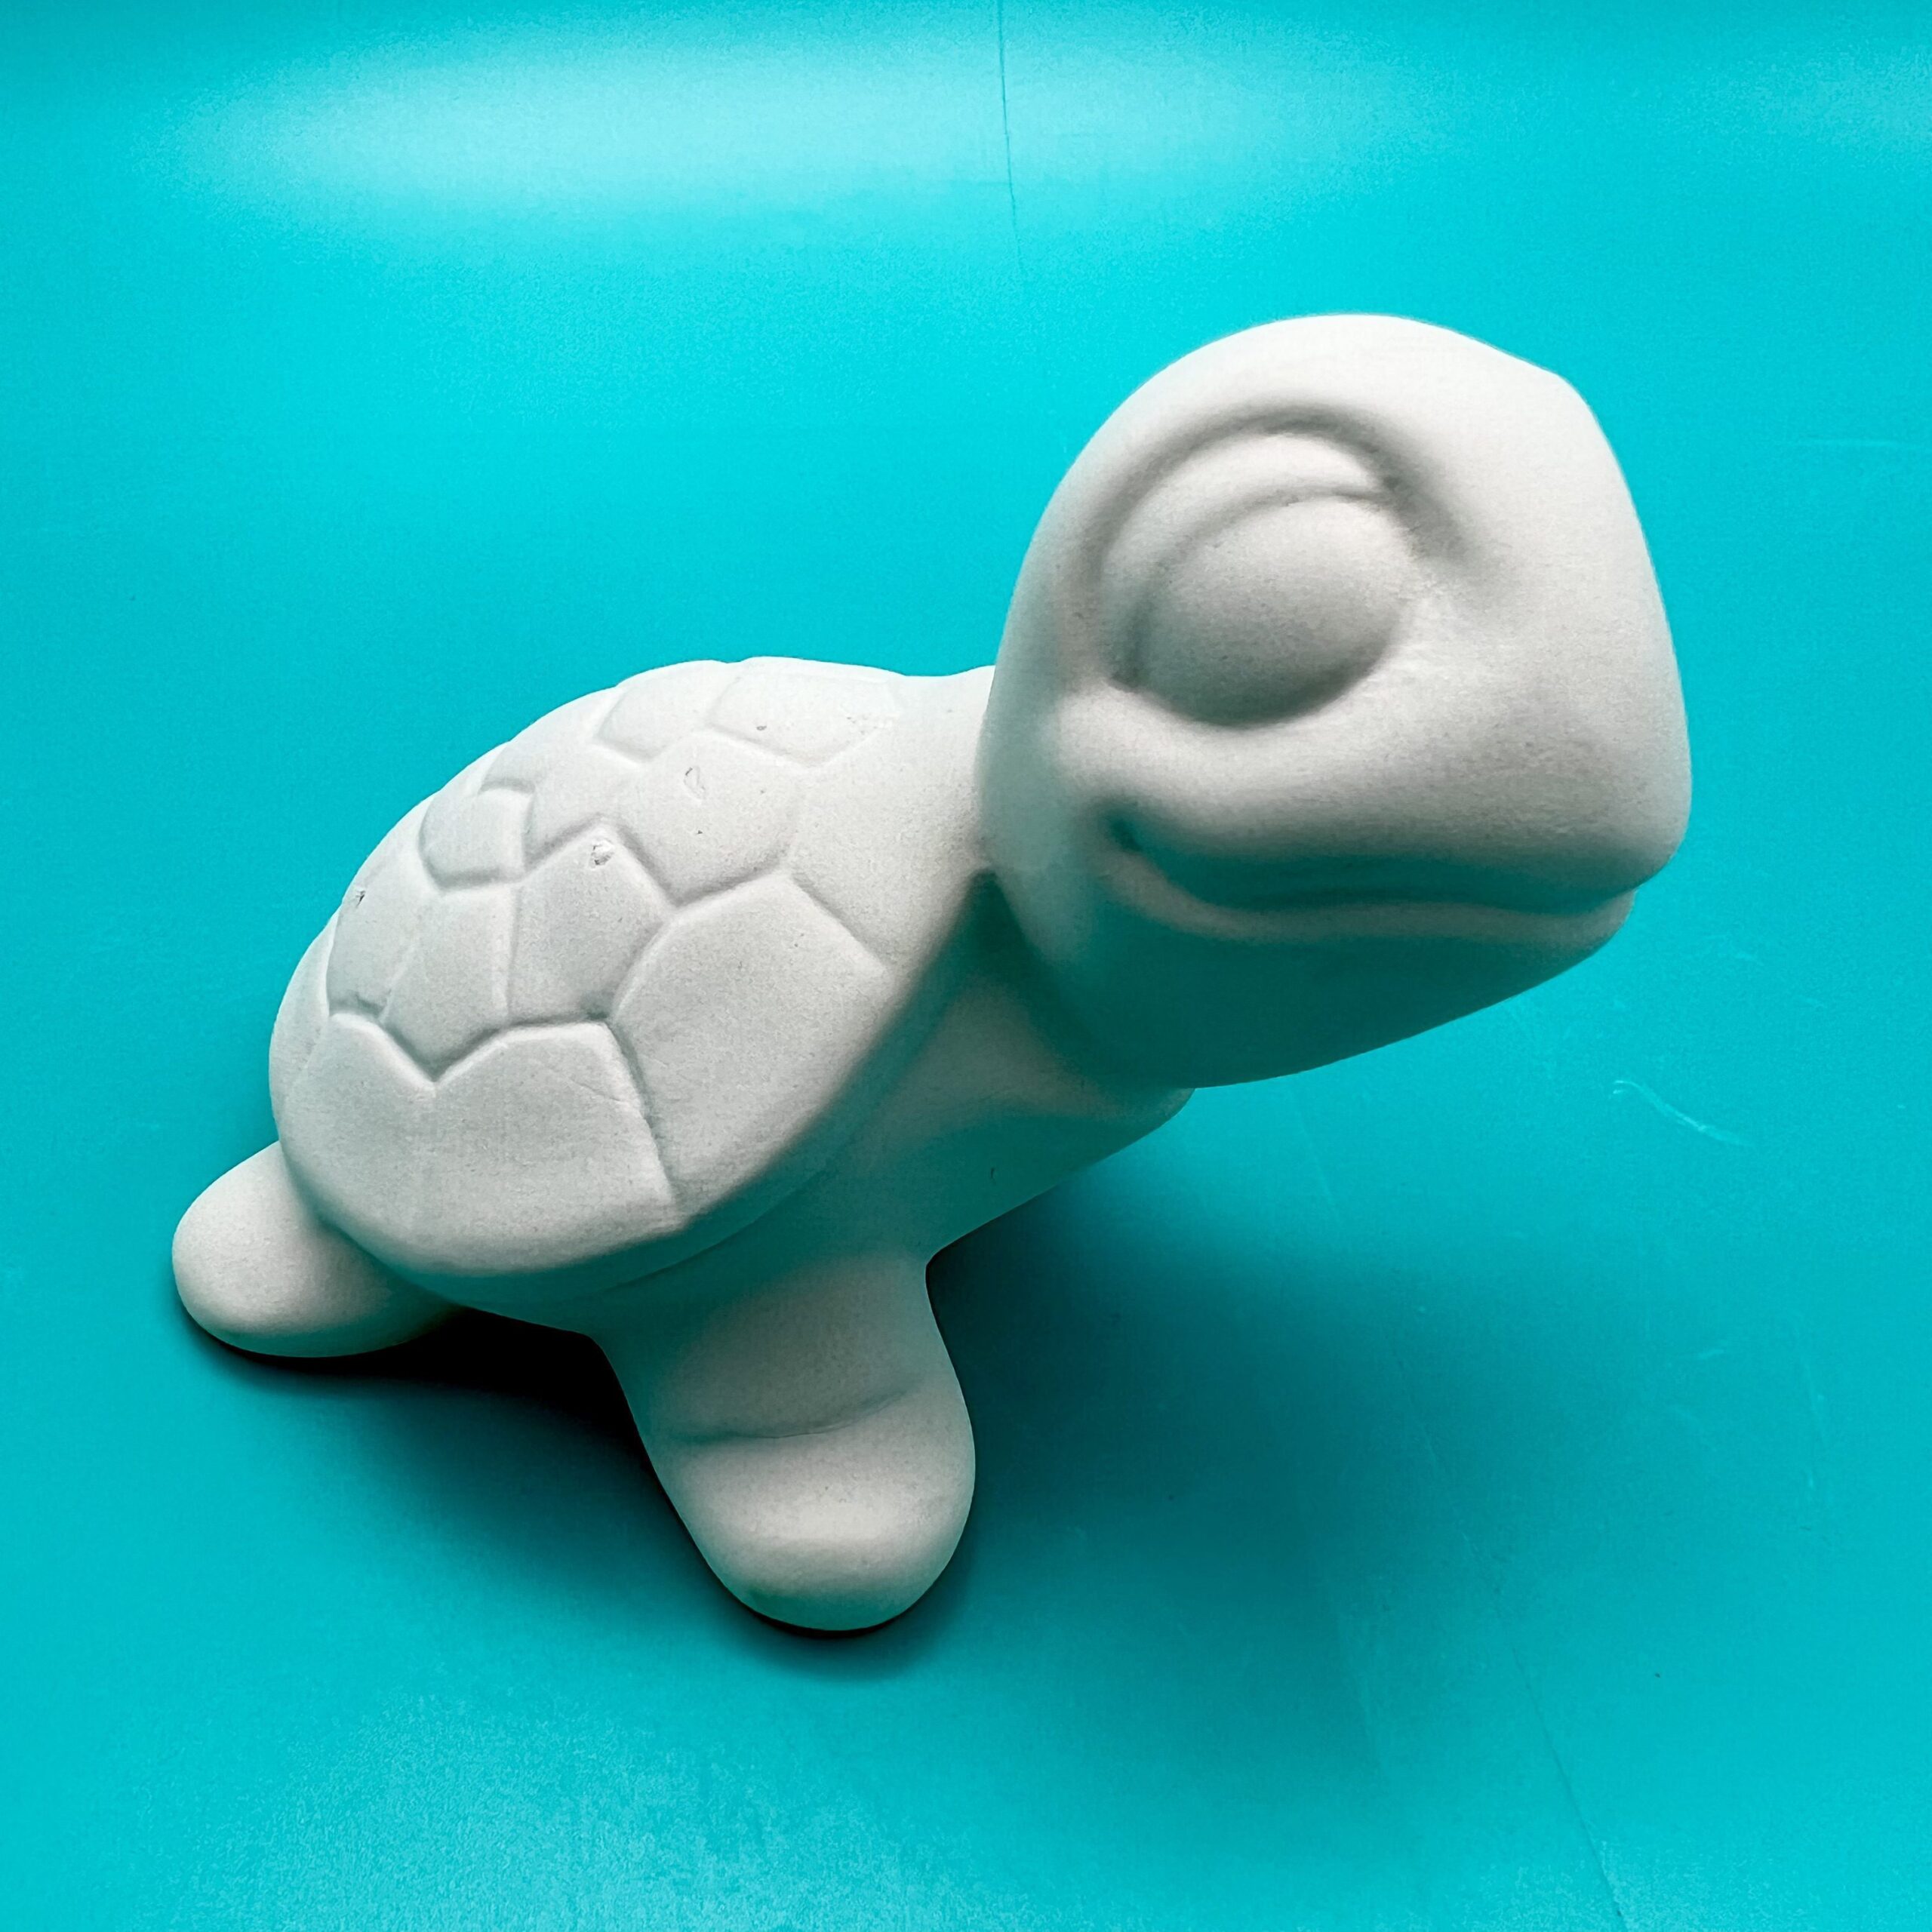 Ready-to-Paint ceramic Crush the Sea Turtle from Create Art Studio's Toronto location and online store